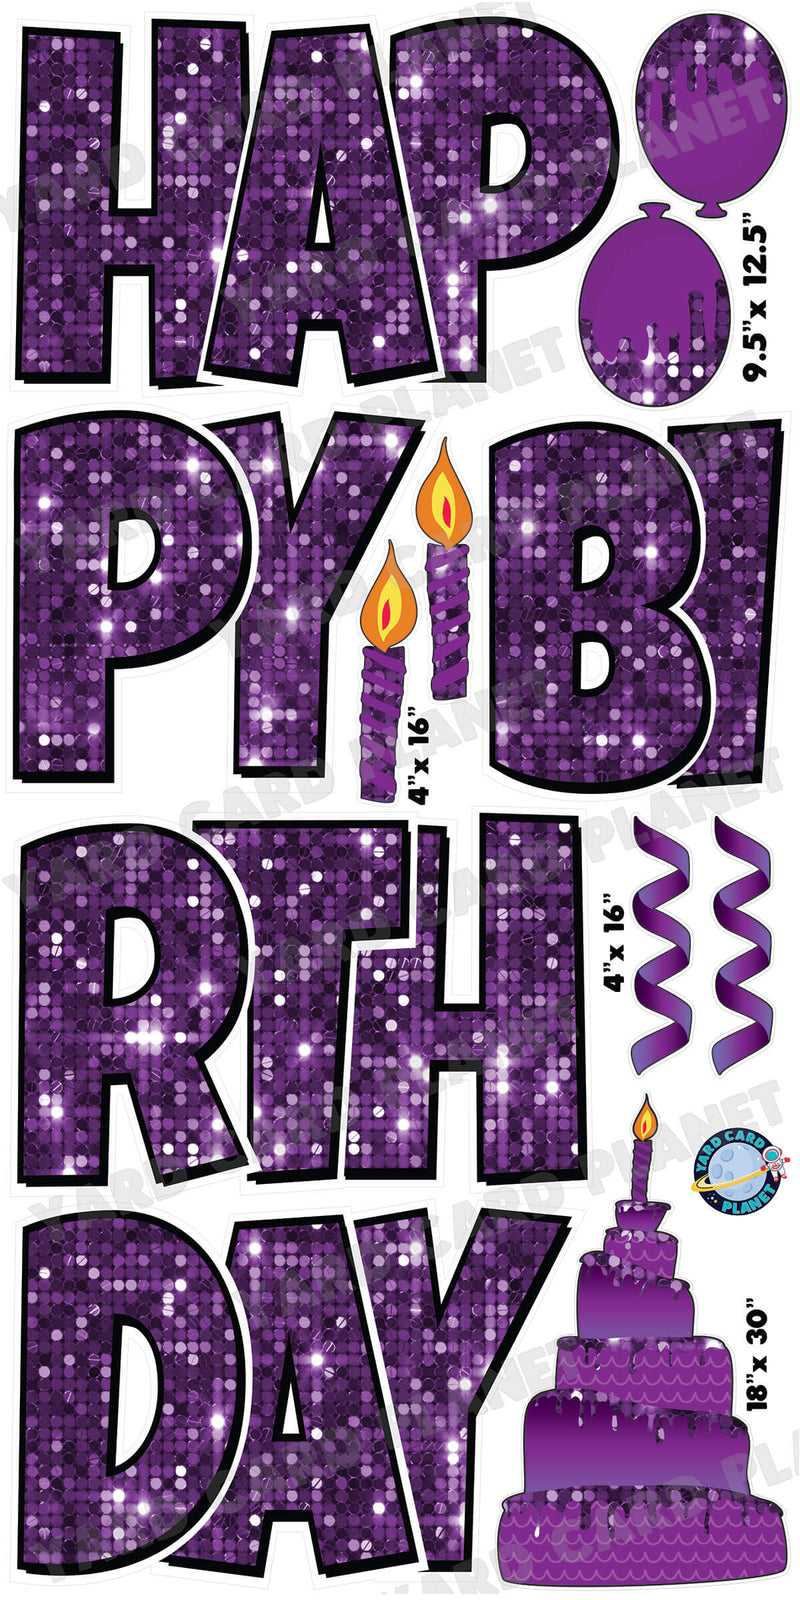 Large 23.5" Happy Birthday Yard Card EZ Quick Sets in Luckiest Guy Font and Birthday Flair in Purple Sequin Pattern